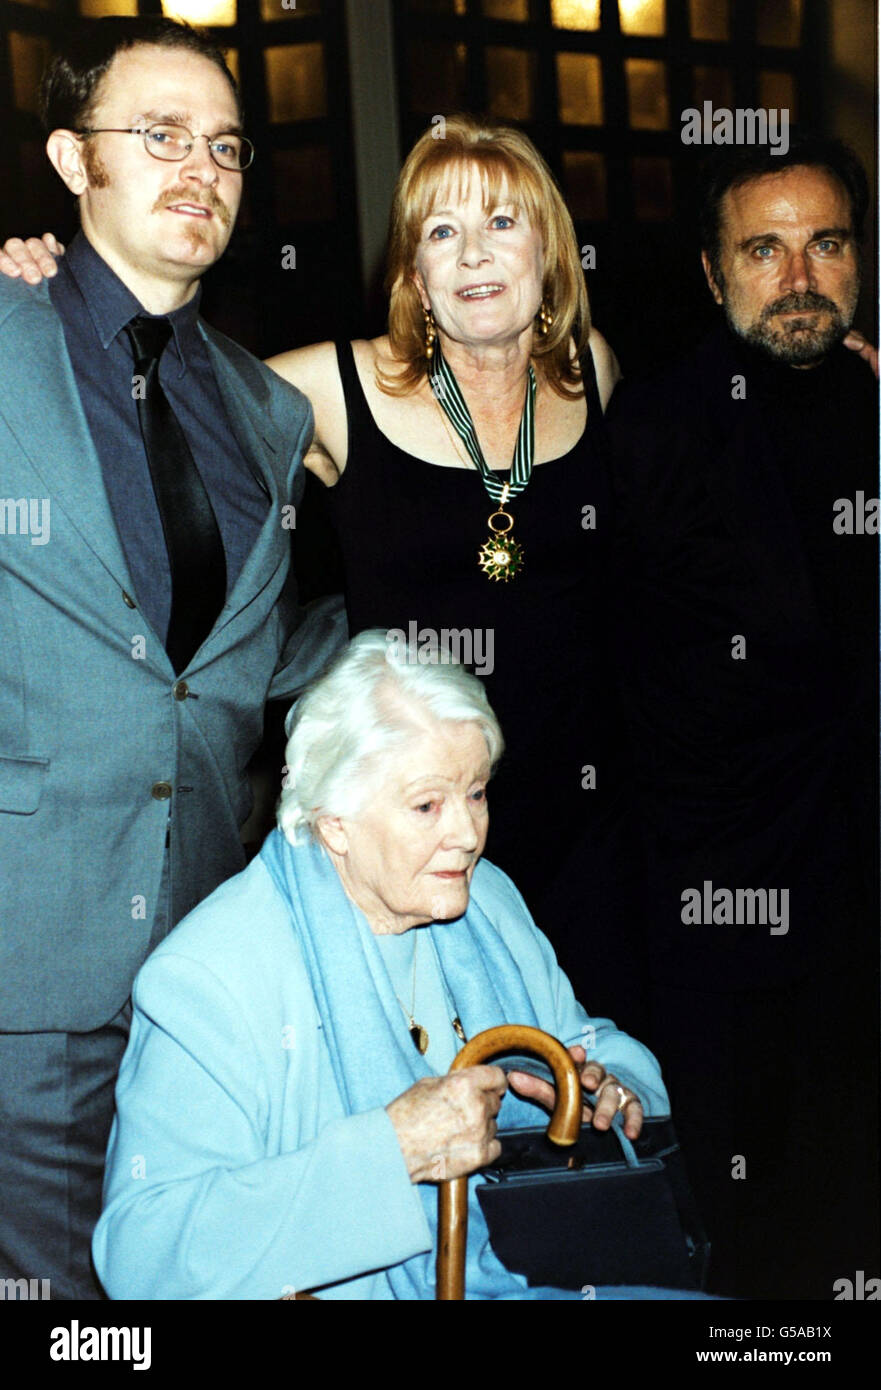 Carlo Nero (left, son of Vanessa and Franco) with Vanessa Redgrave (centre), actor Franco Nero (right) and Vanessa's mother (sitting), Lady Redgrave, at the ceremony where Vanessa was awarded the Insignia Officier de l'Orde des Arts et des Lettres. * ...by French Amabassador Daniel Bernard on behalf of the French government at the Institut Francais, in London. Stock Photo